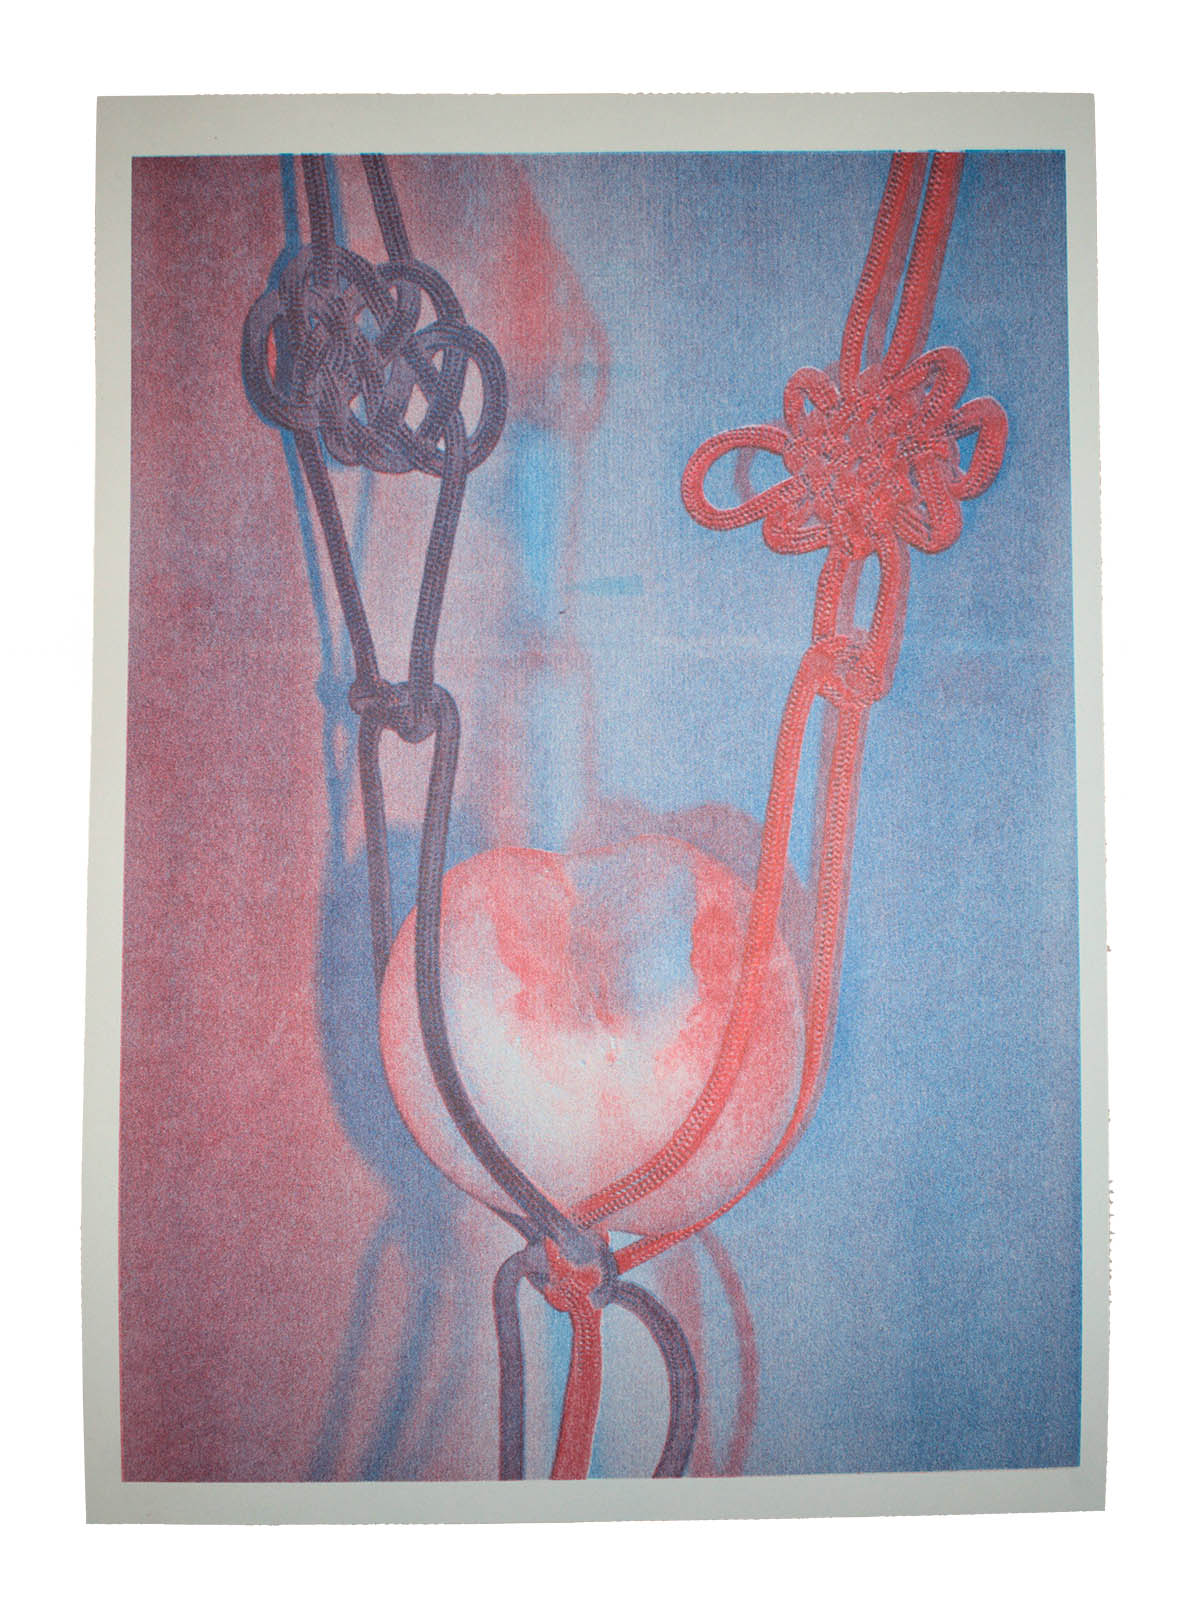 A bitten peach hanging from one blue rope and one red rope, one with a Celtic knot and one with a Pan Chang knot. Risograph print using Med Blue and Red ink.